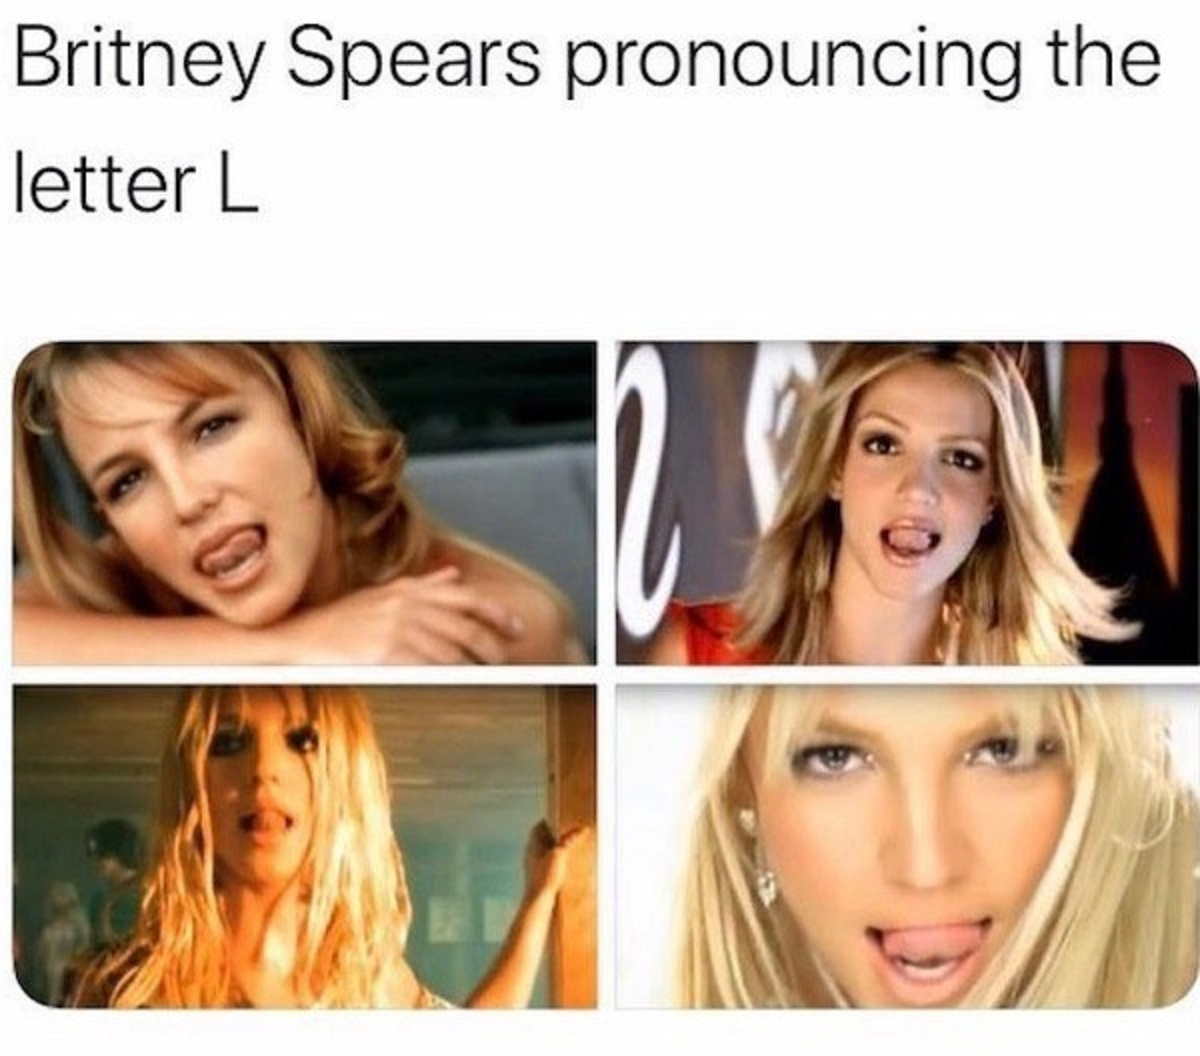 blond - Britney Spears pronouncing the letter L